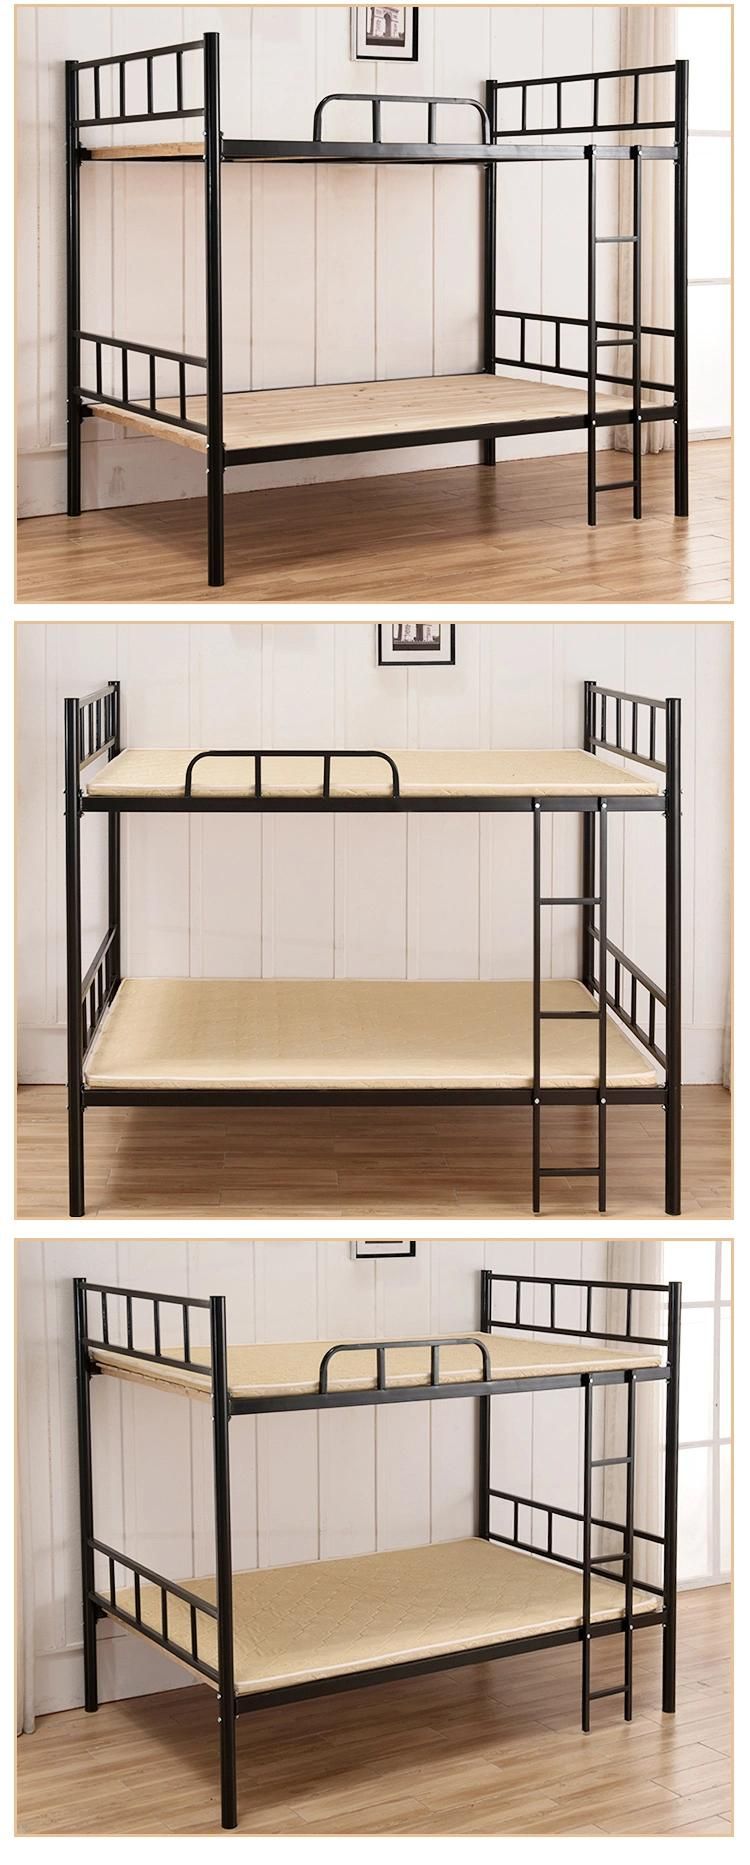 Factory Outlet Bedroom Furniture Adult Steel Iron Metal Bunk Bed Prices